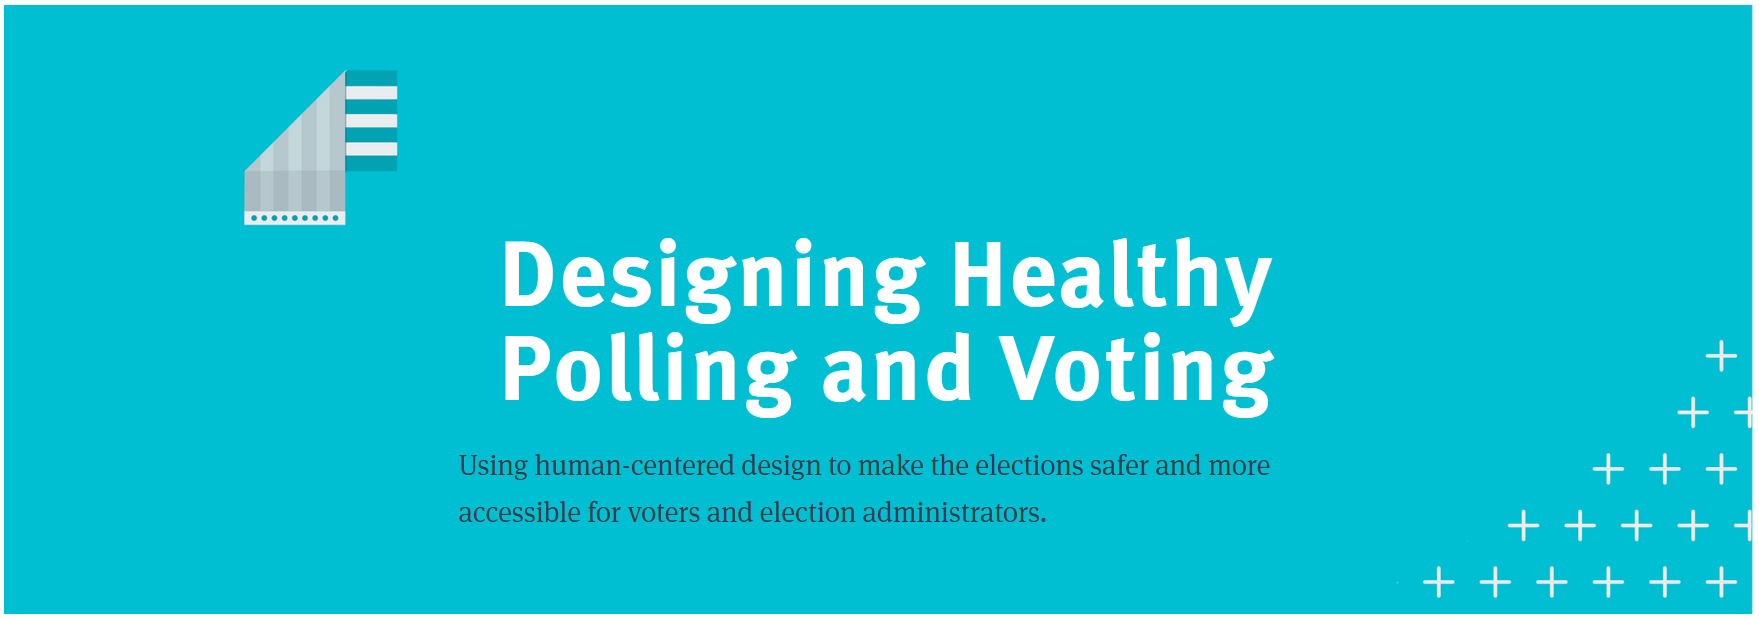 A turquoise banner with the text "Designing Healthy Polling and Voting"